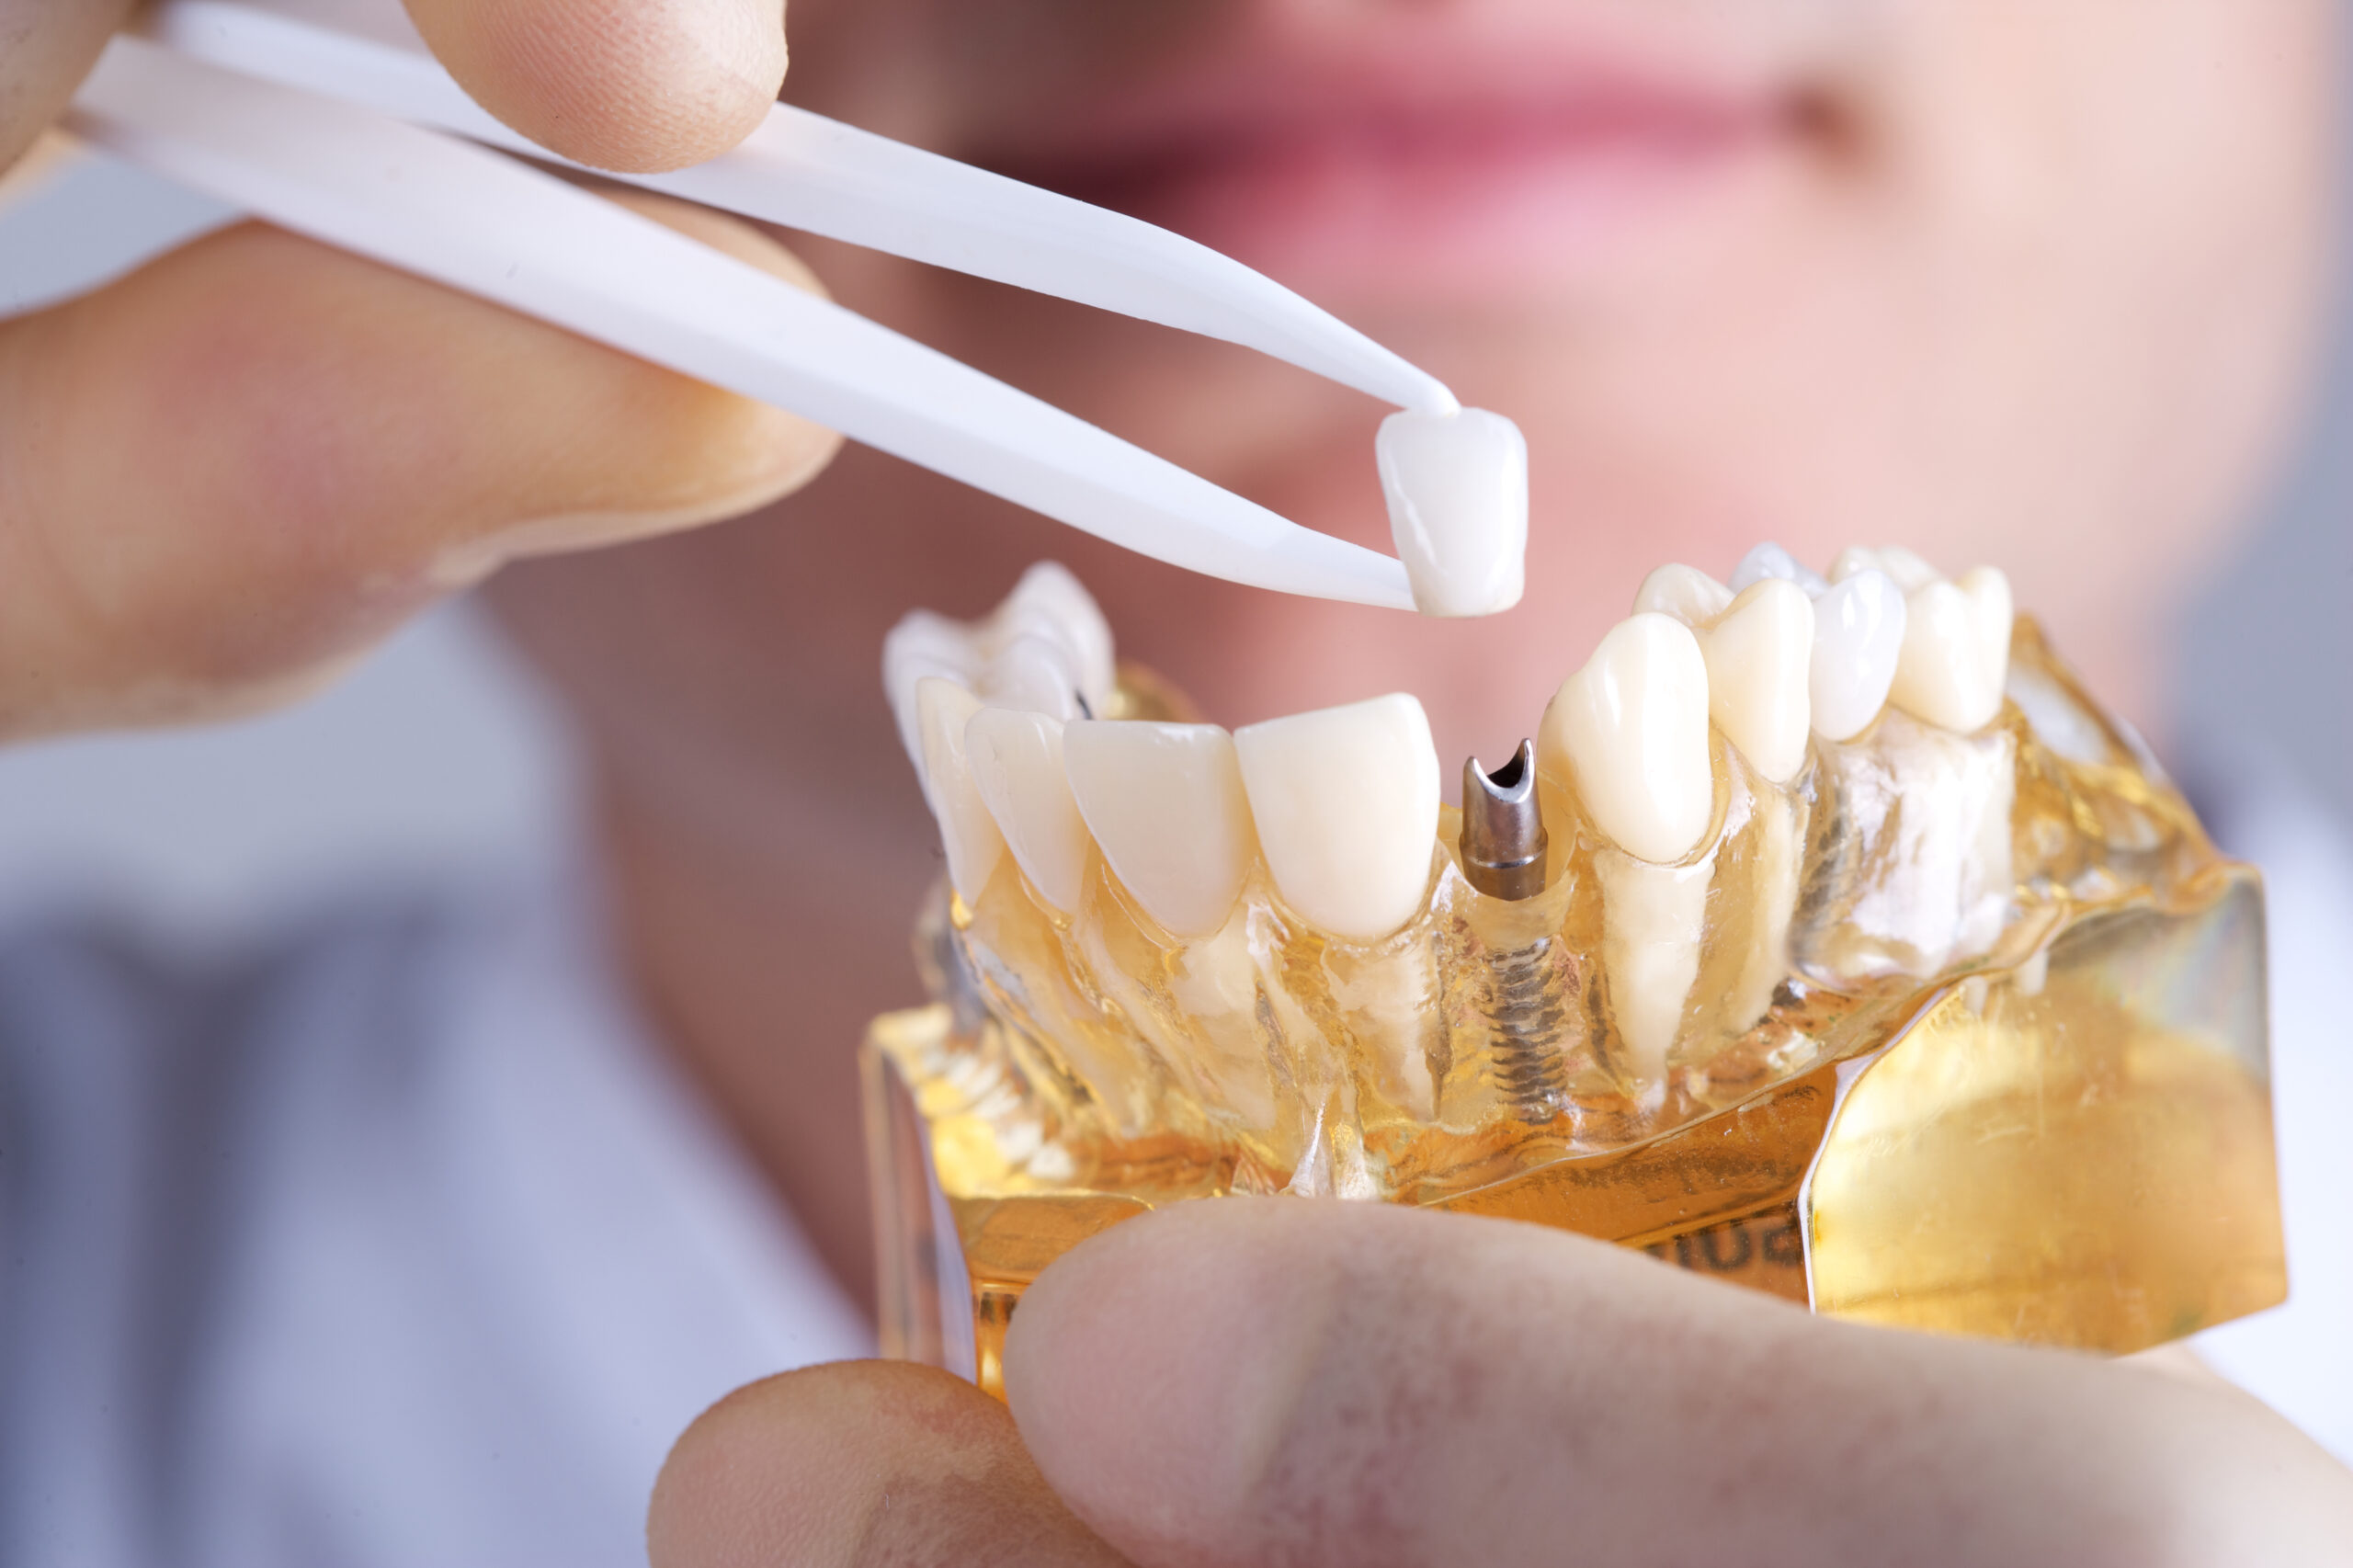 dental implants a permanent tooth replacement to consider